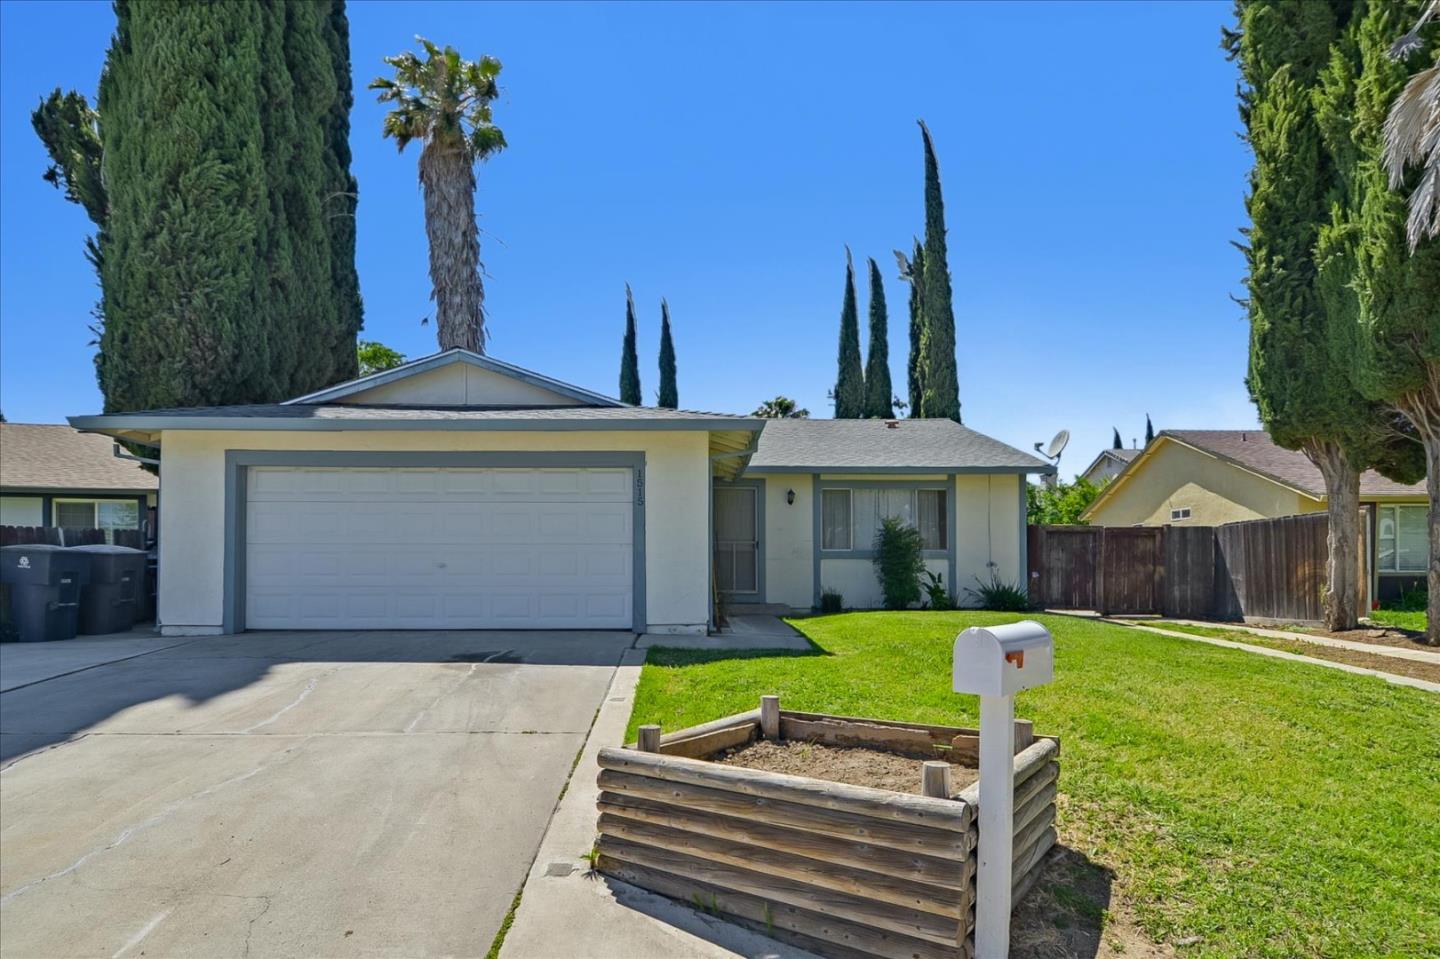 Photo of 1515 Griffith Pl in Tracy, CA